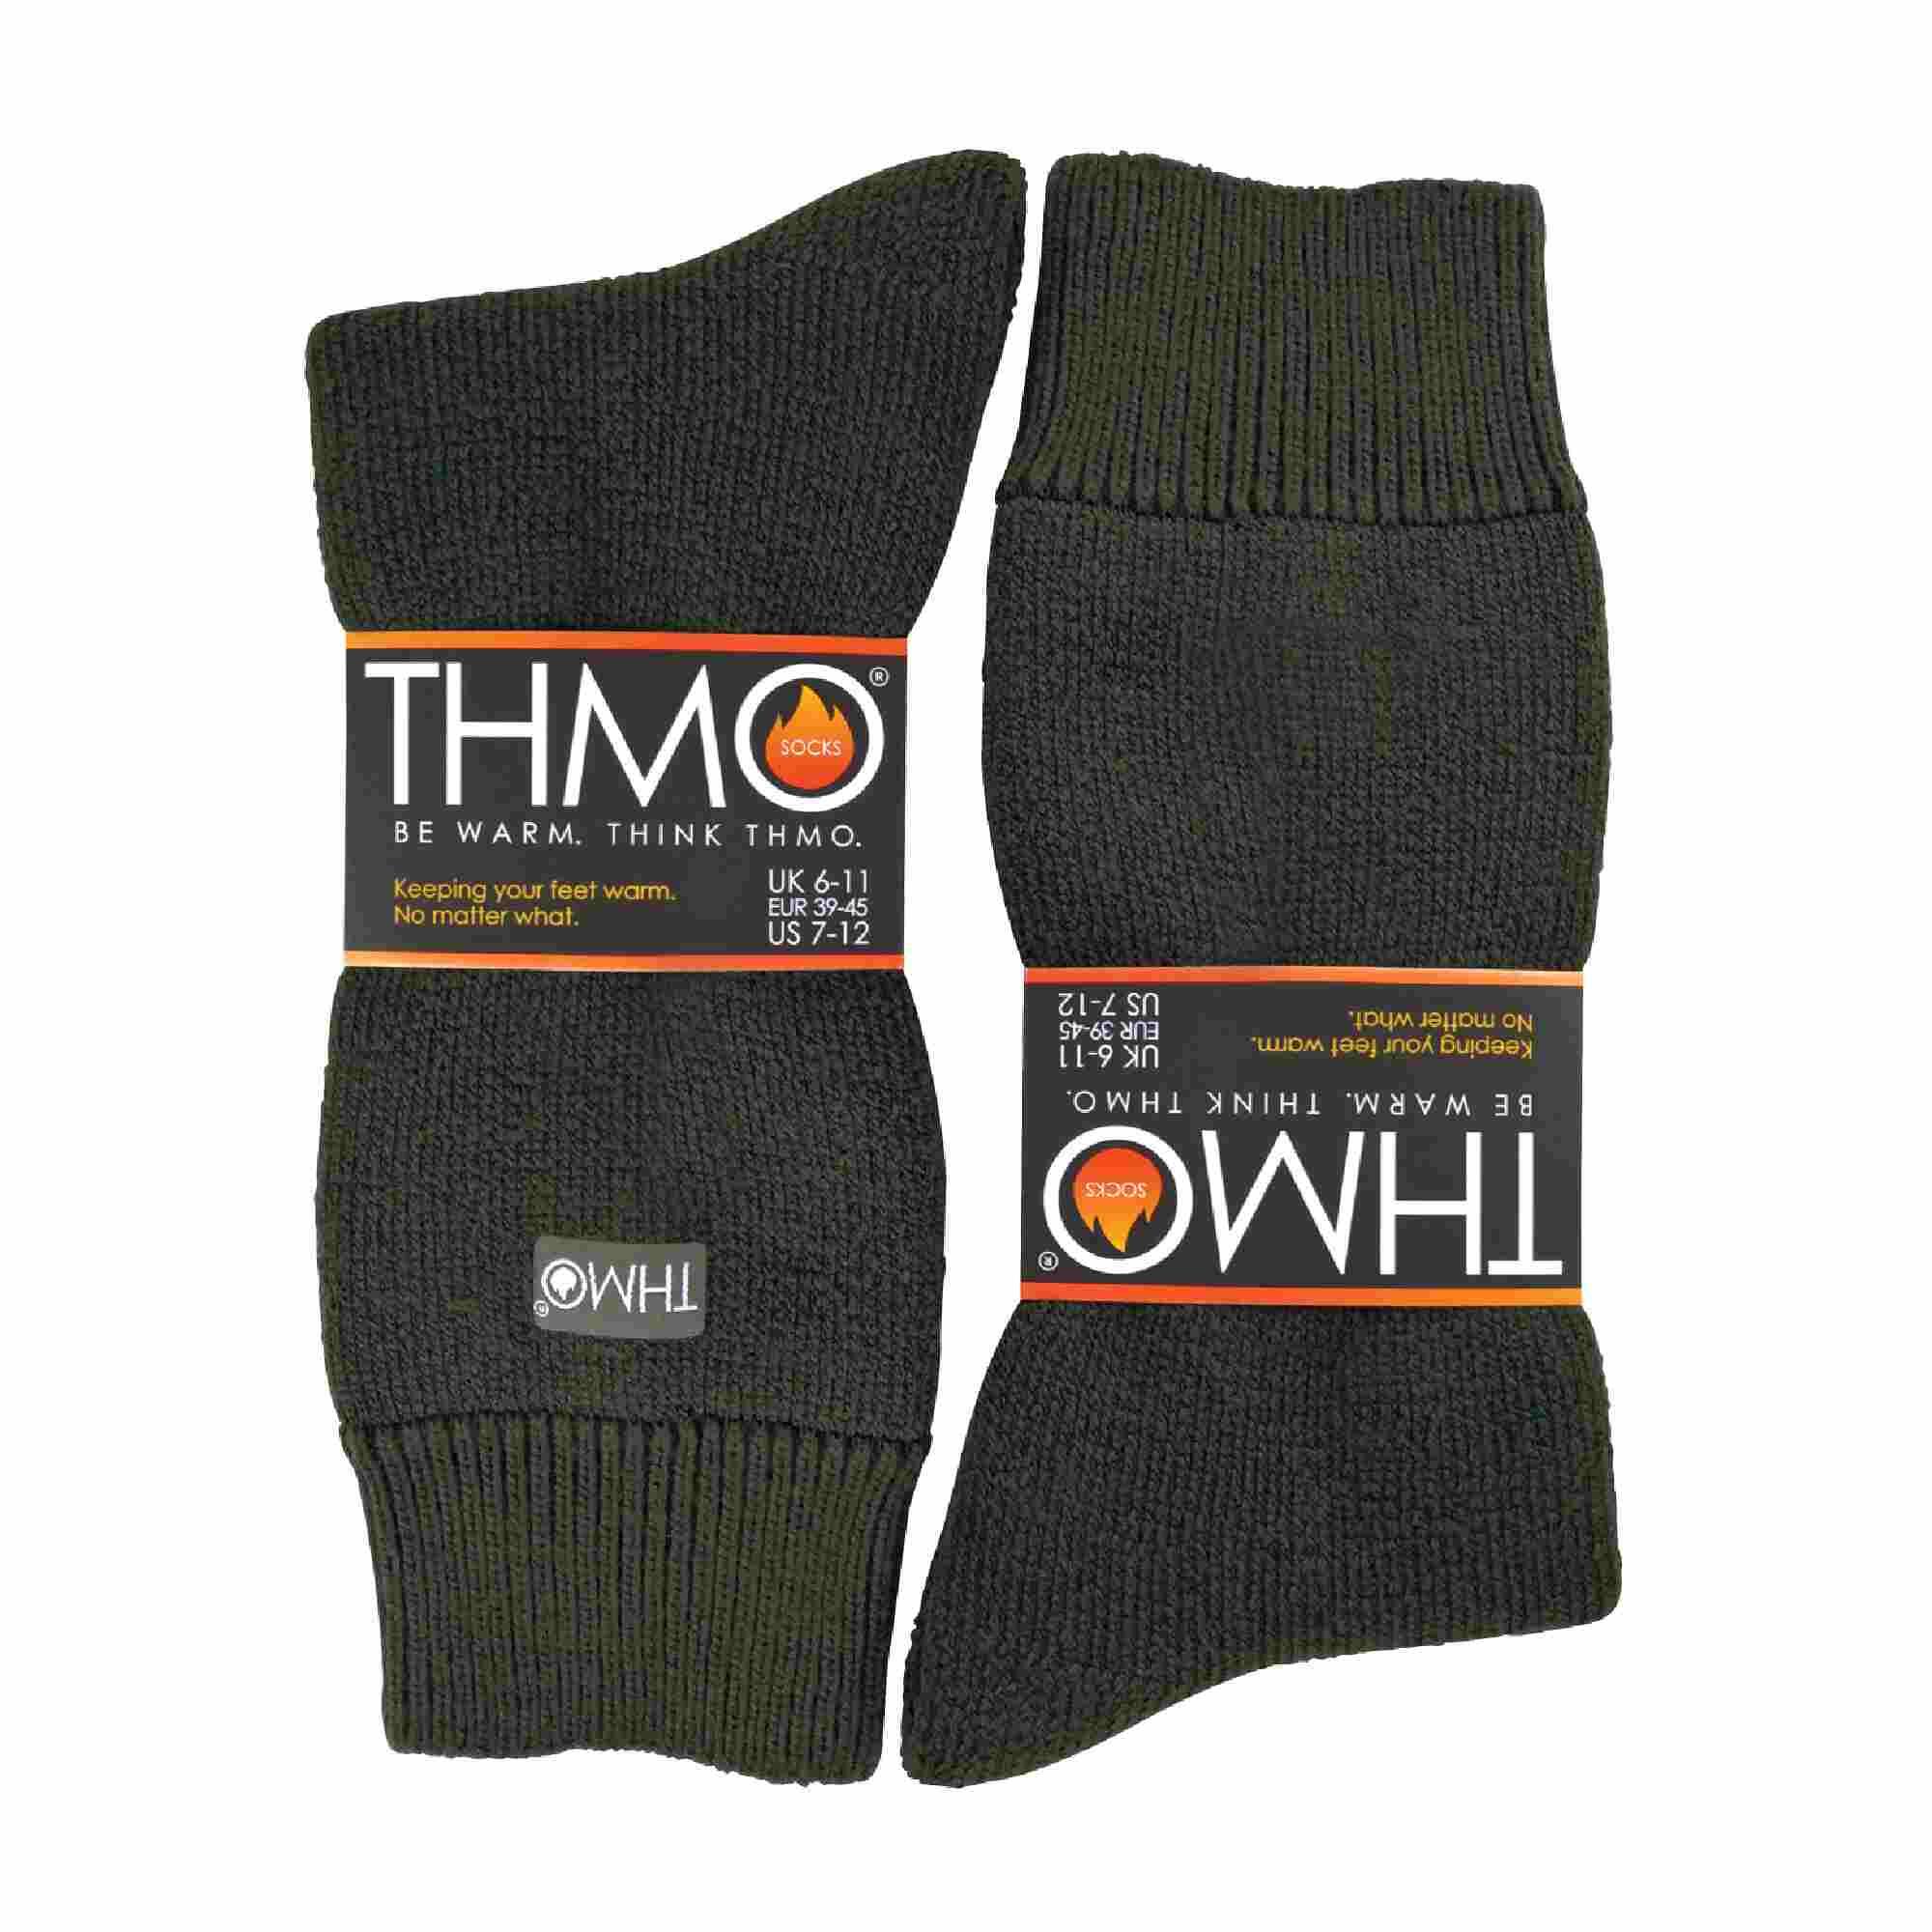 1 Pair Mens Thick Fleece Lined Warm Thermal Socks for Winter 2/7